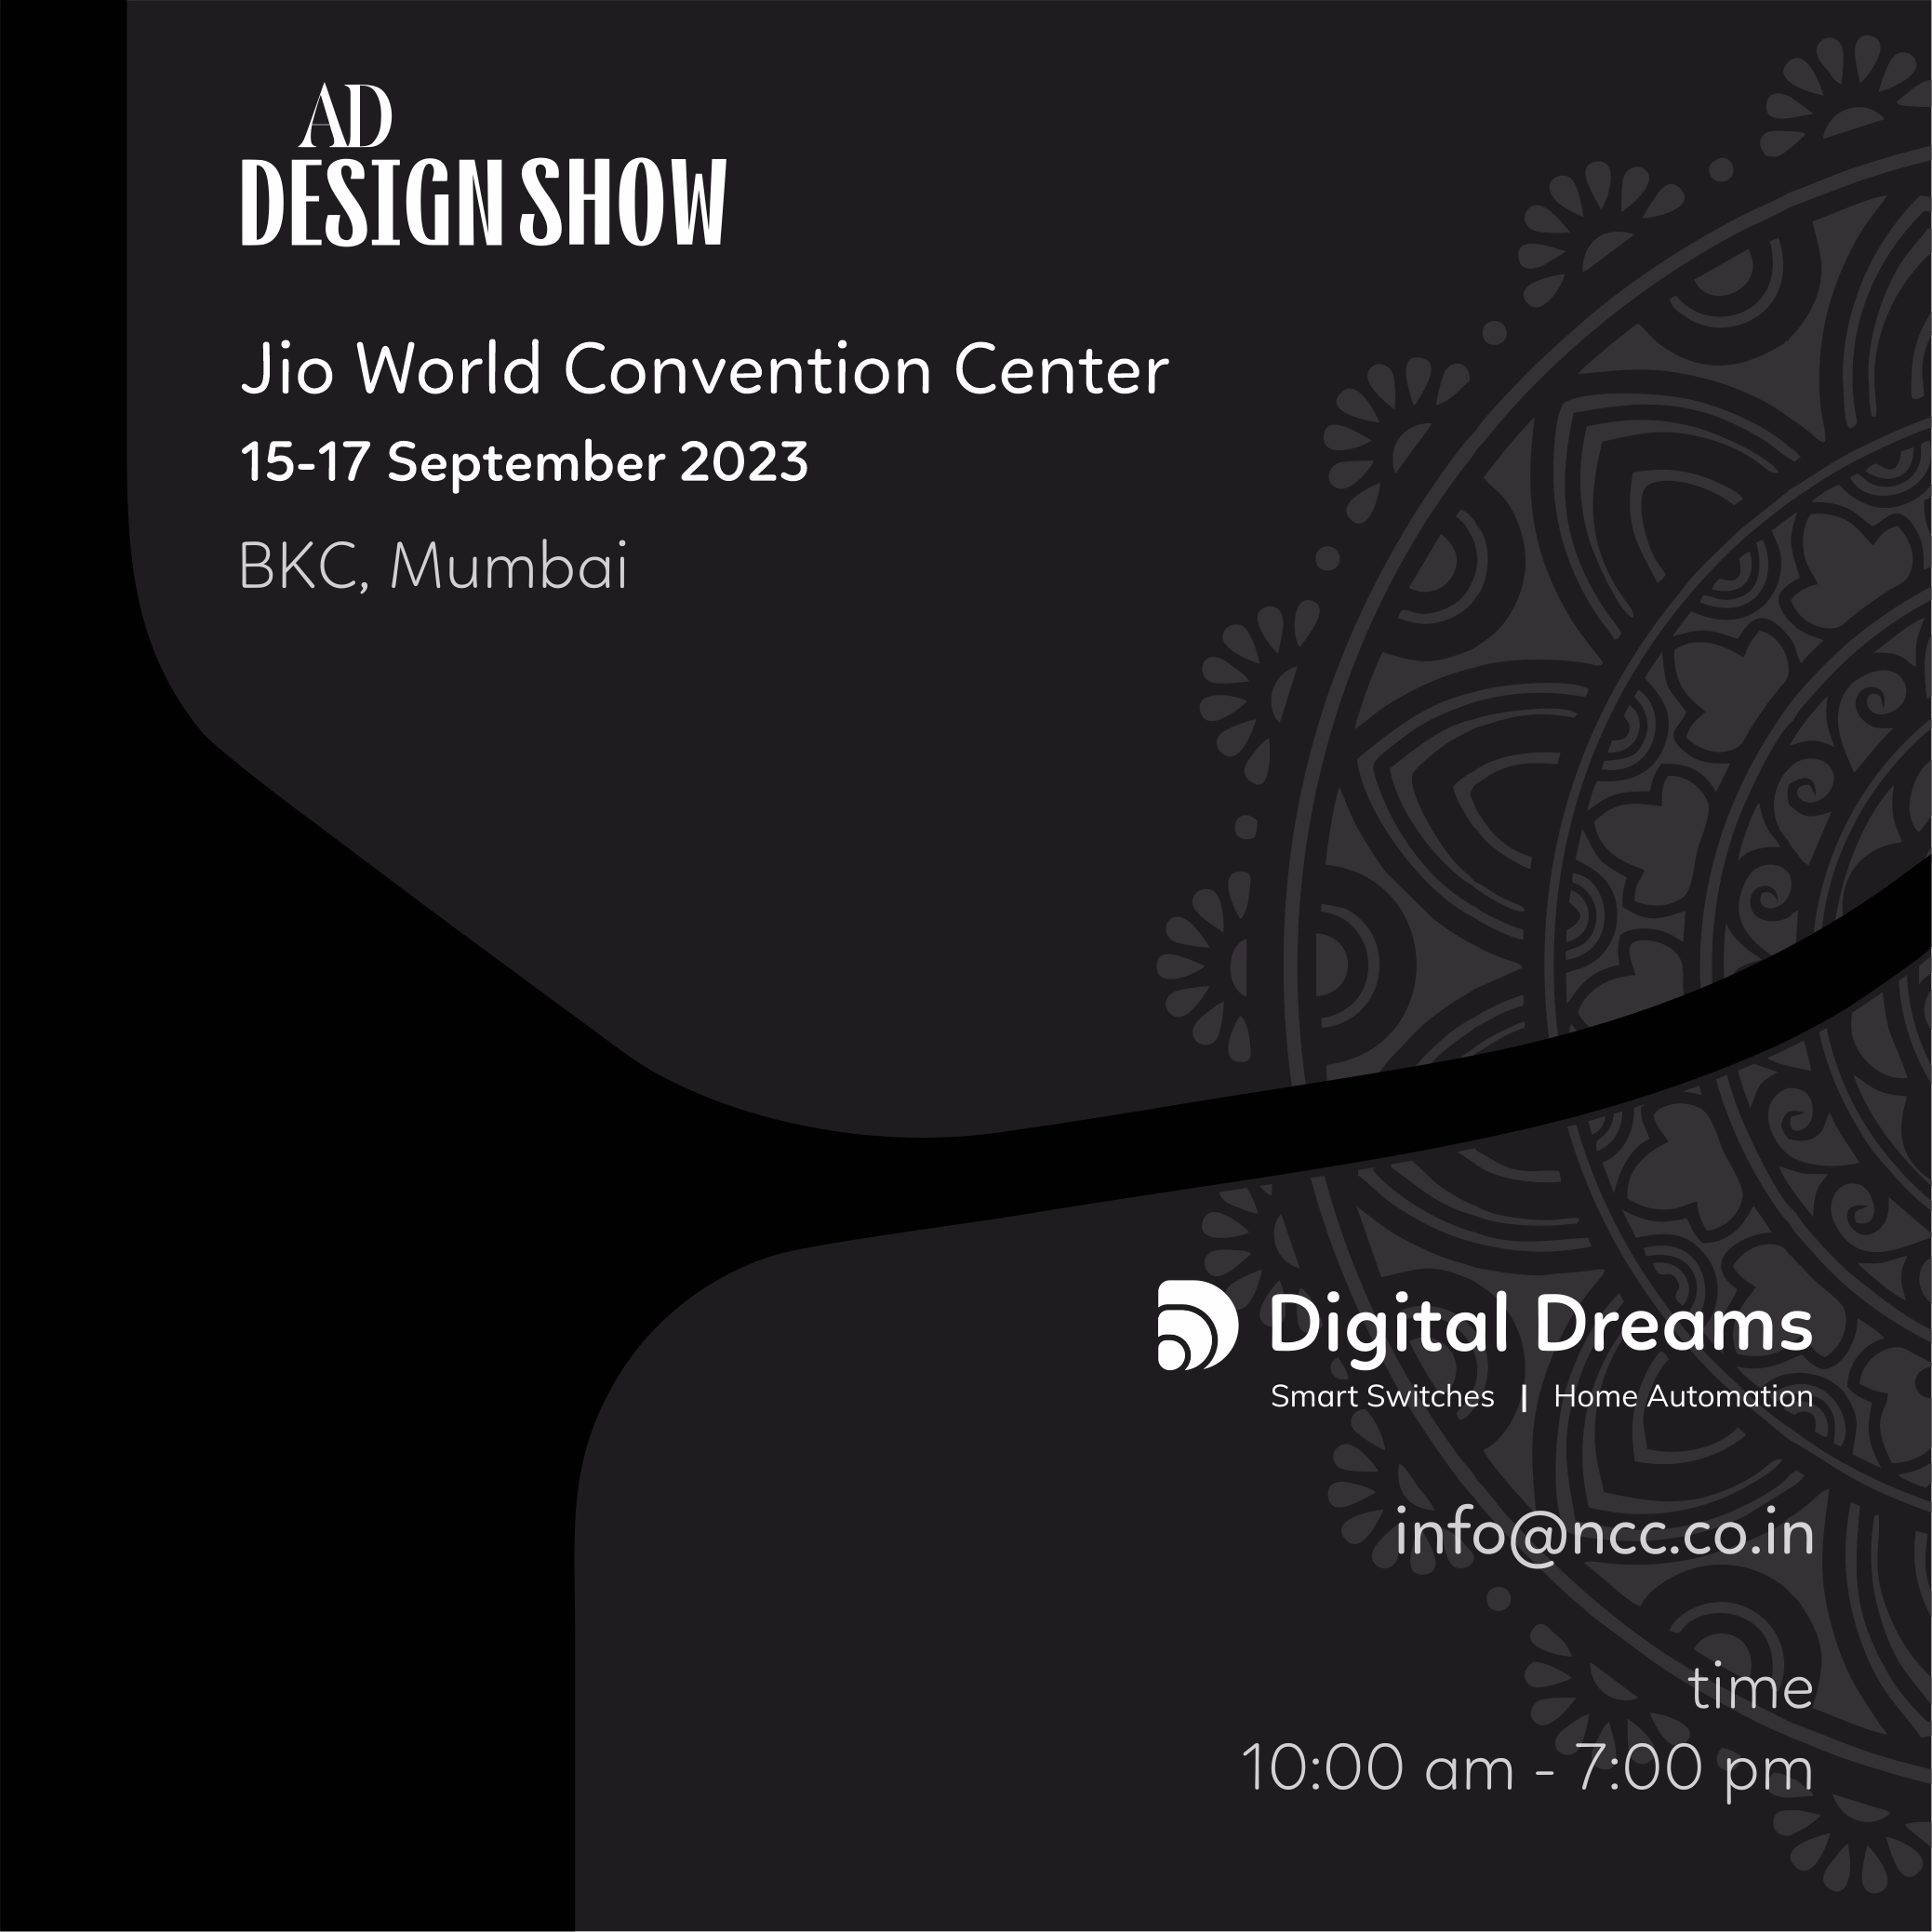 Join us at @ AD Design Show 15-17 September 2023 Booth DB8 Jio World Convention Center, Mumbai